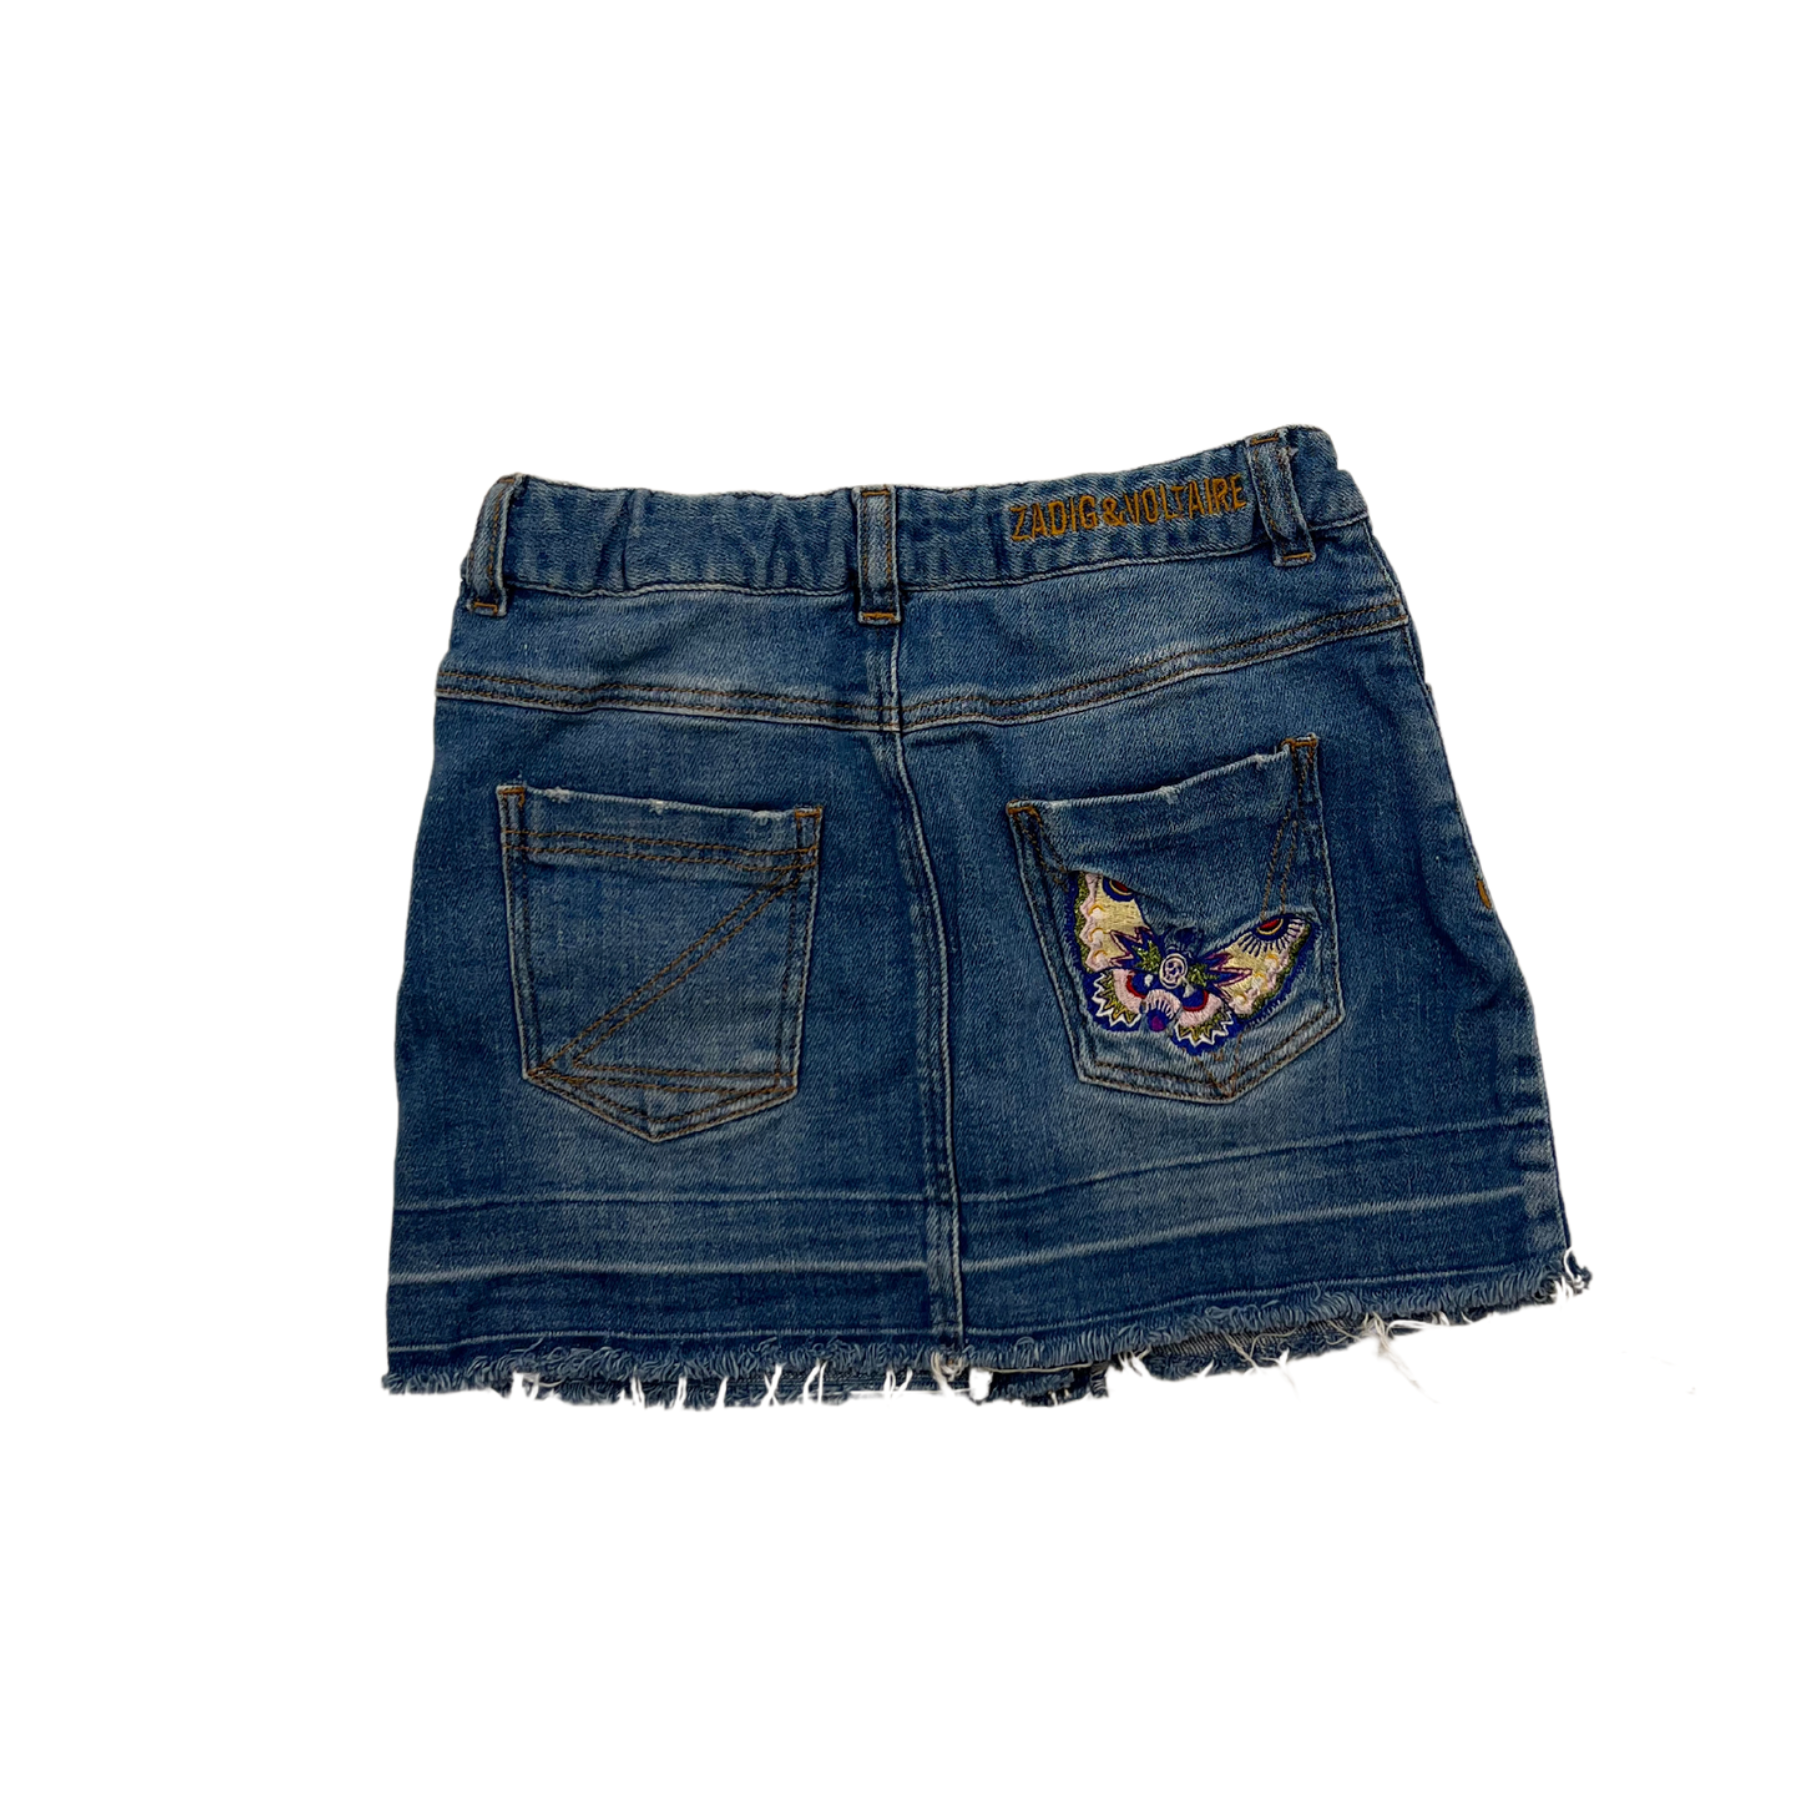 ZADIG &amp; VOLTAIRE - Skirt - 8 years old